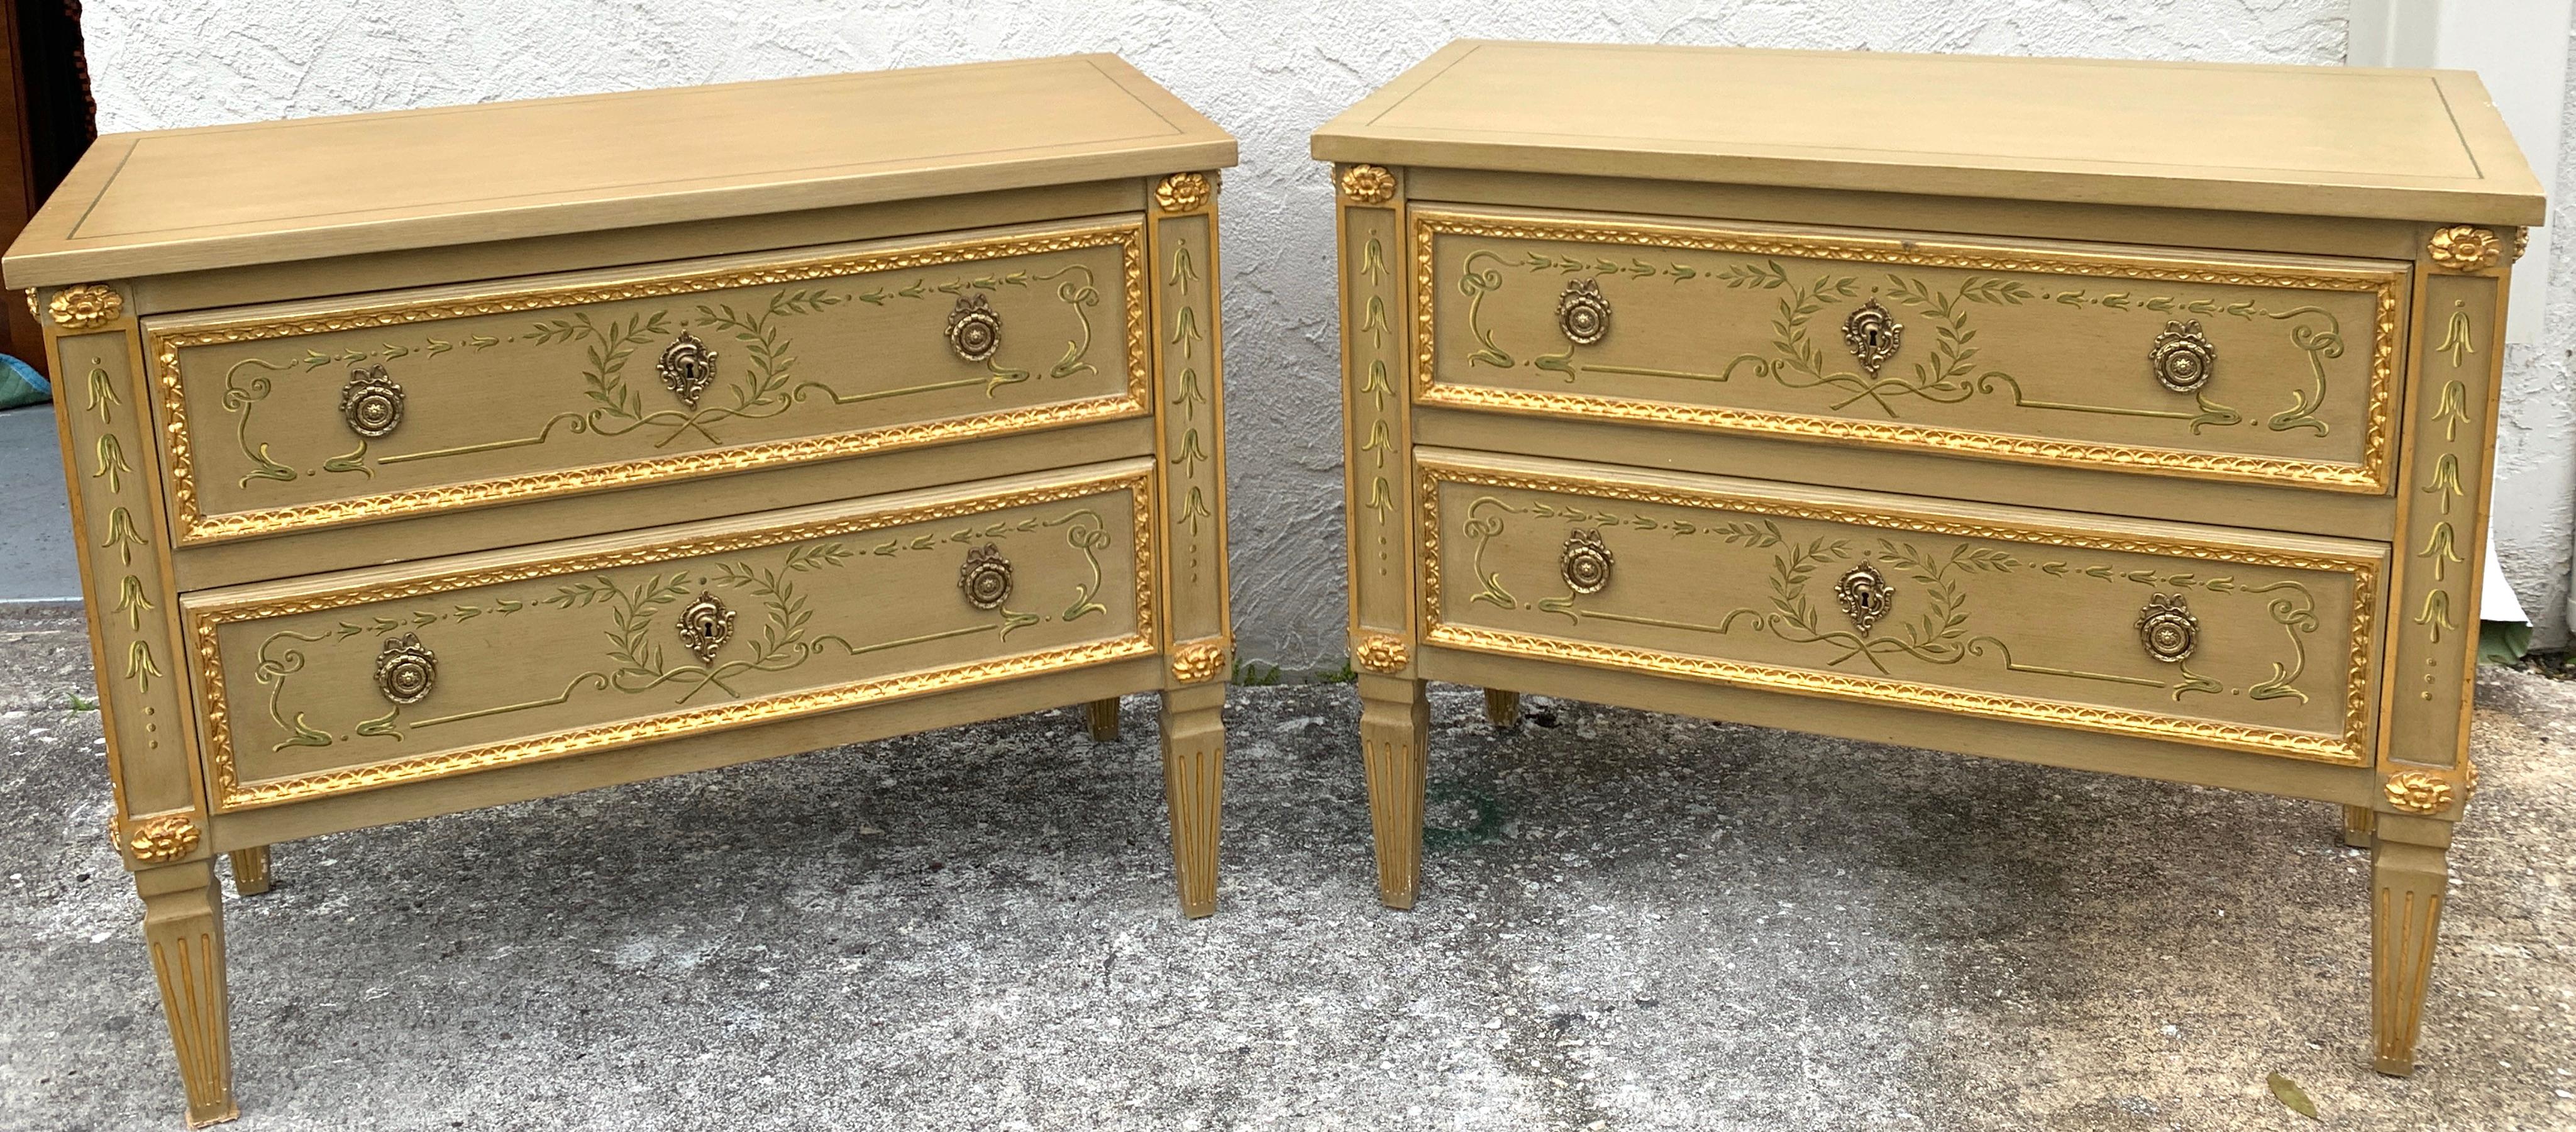 Pair of painted commodes, by Julia Gray
Each one beautifully painted with bronze hardware, fitted with two 35.5